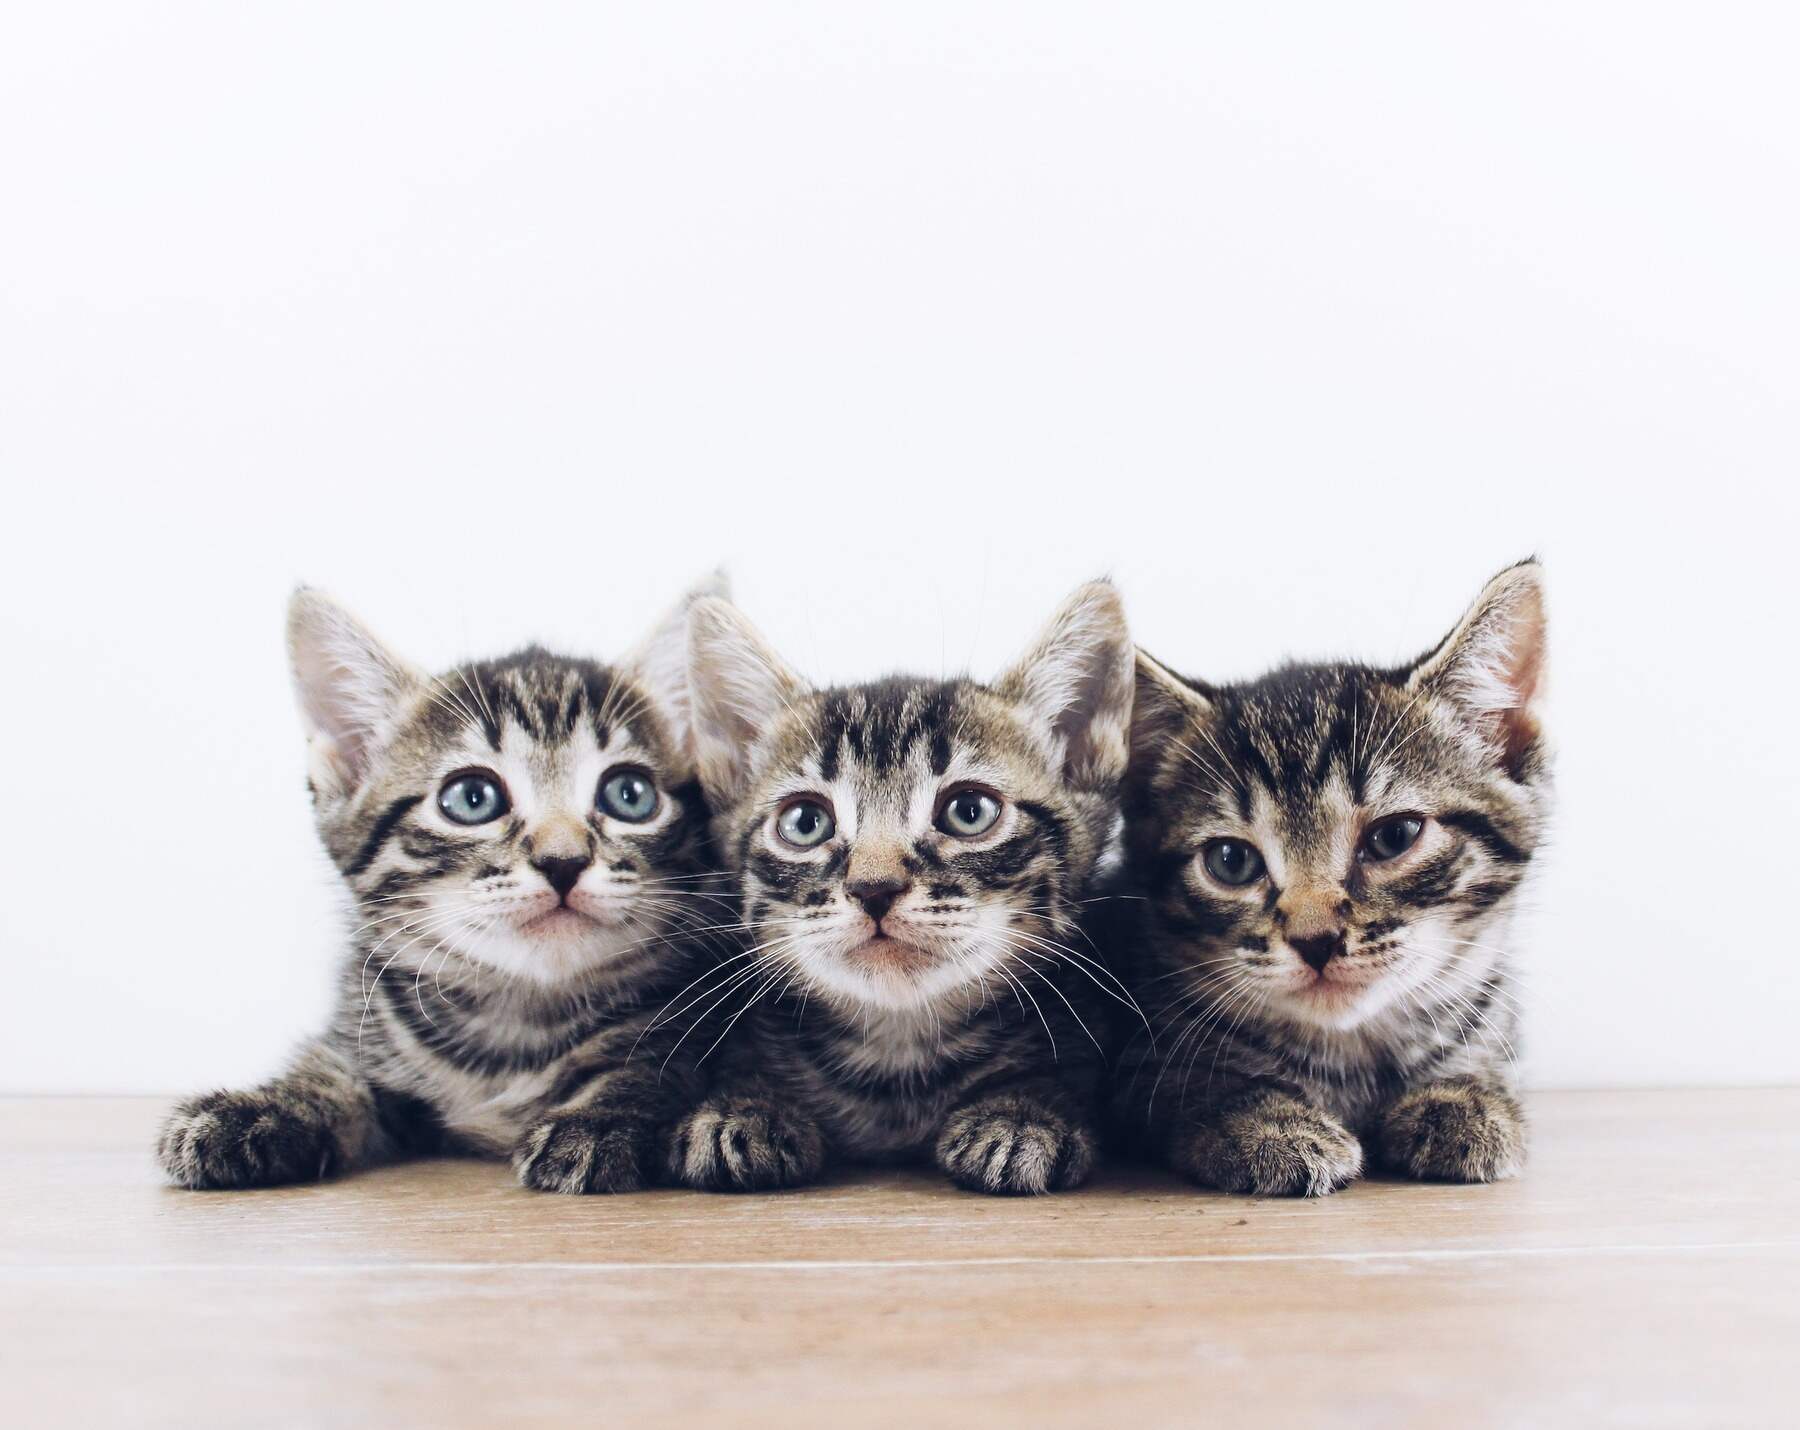 Three striped kittens looking directly at the camera